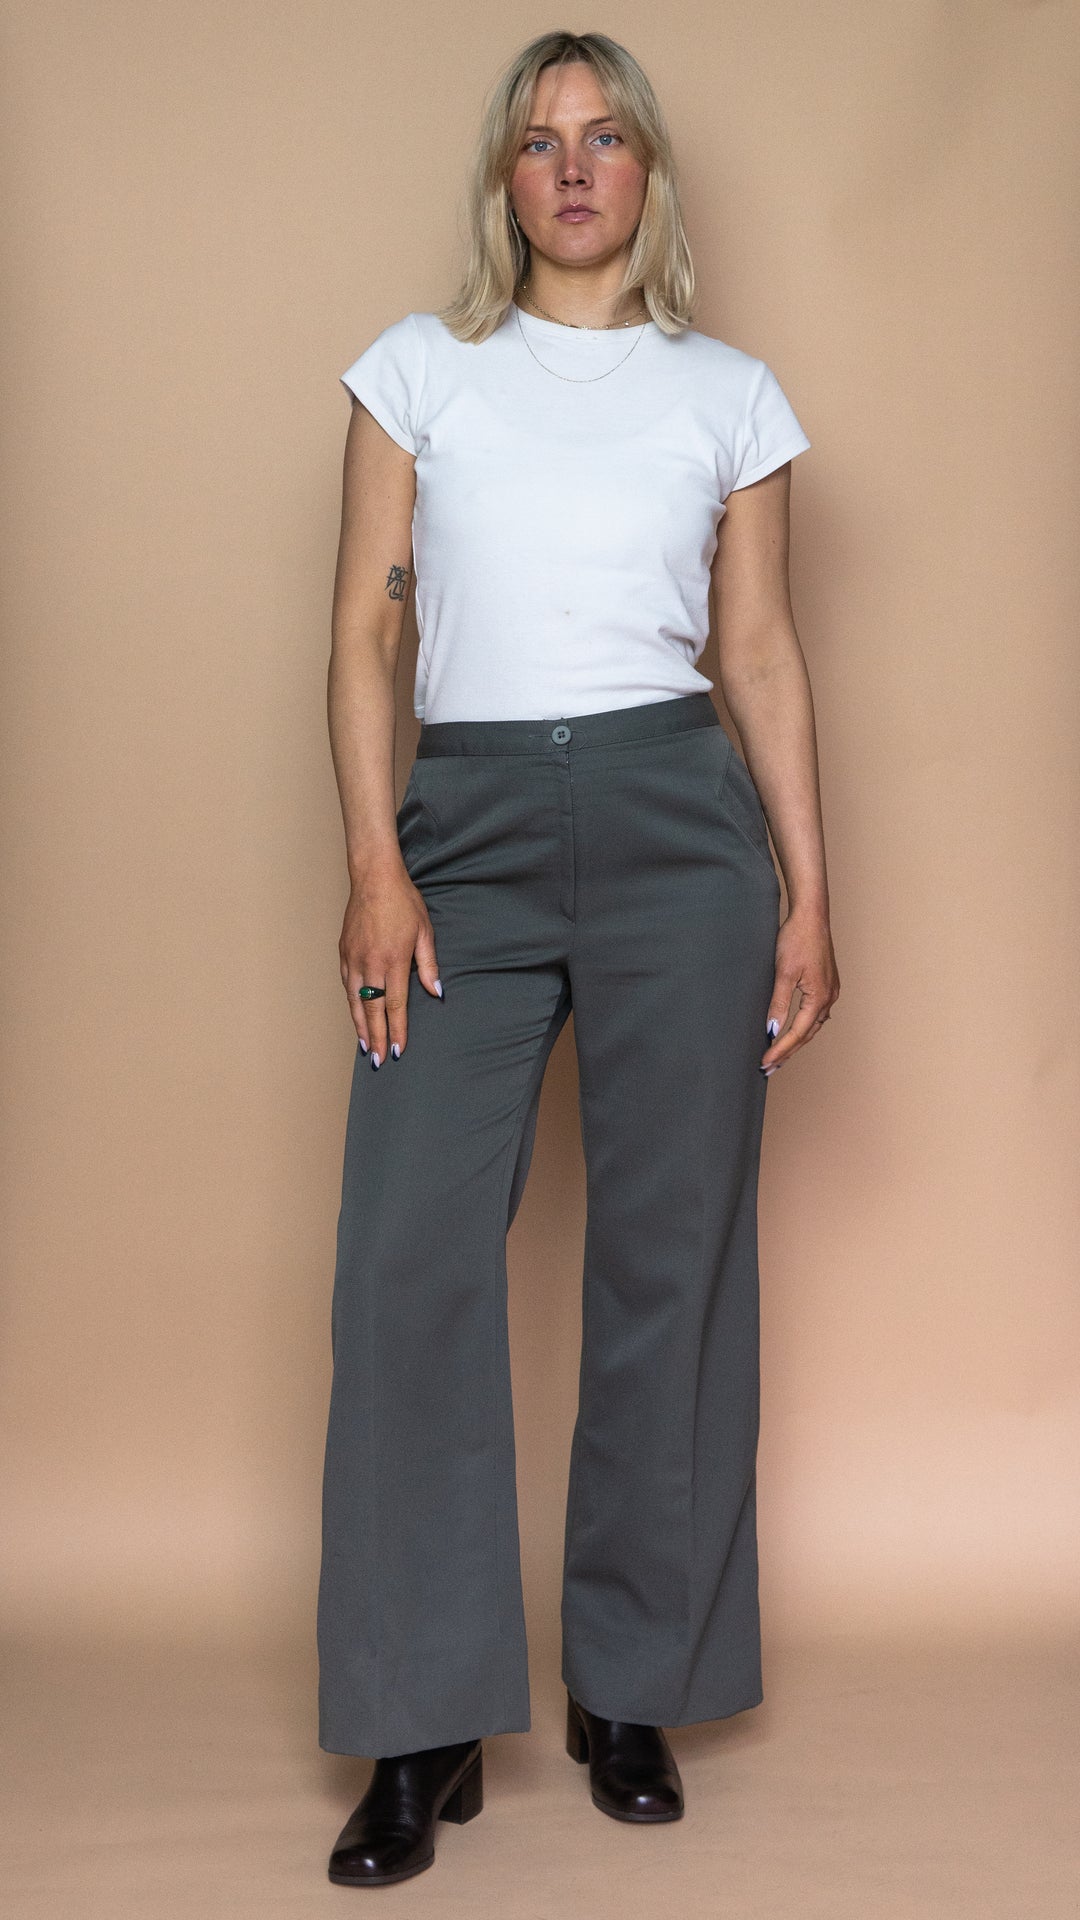 '70s GREY WIDE LEG FLARES - Size M